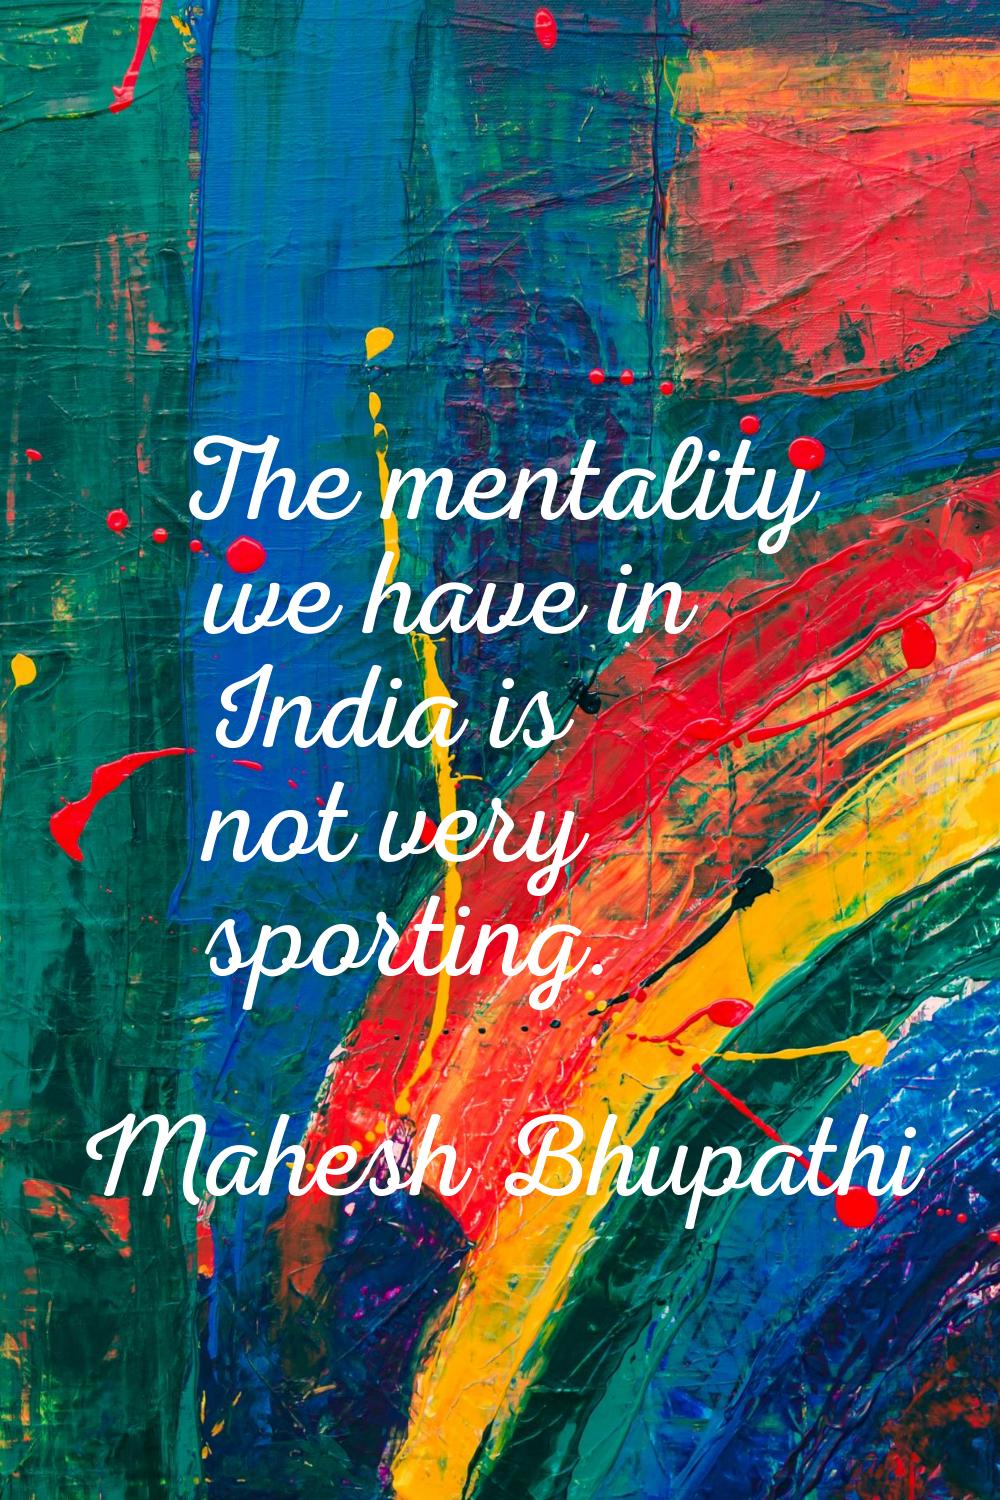 The mentality we have in India is not very sporting.